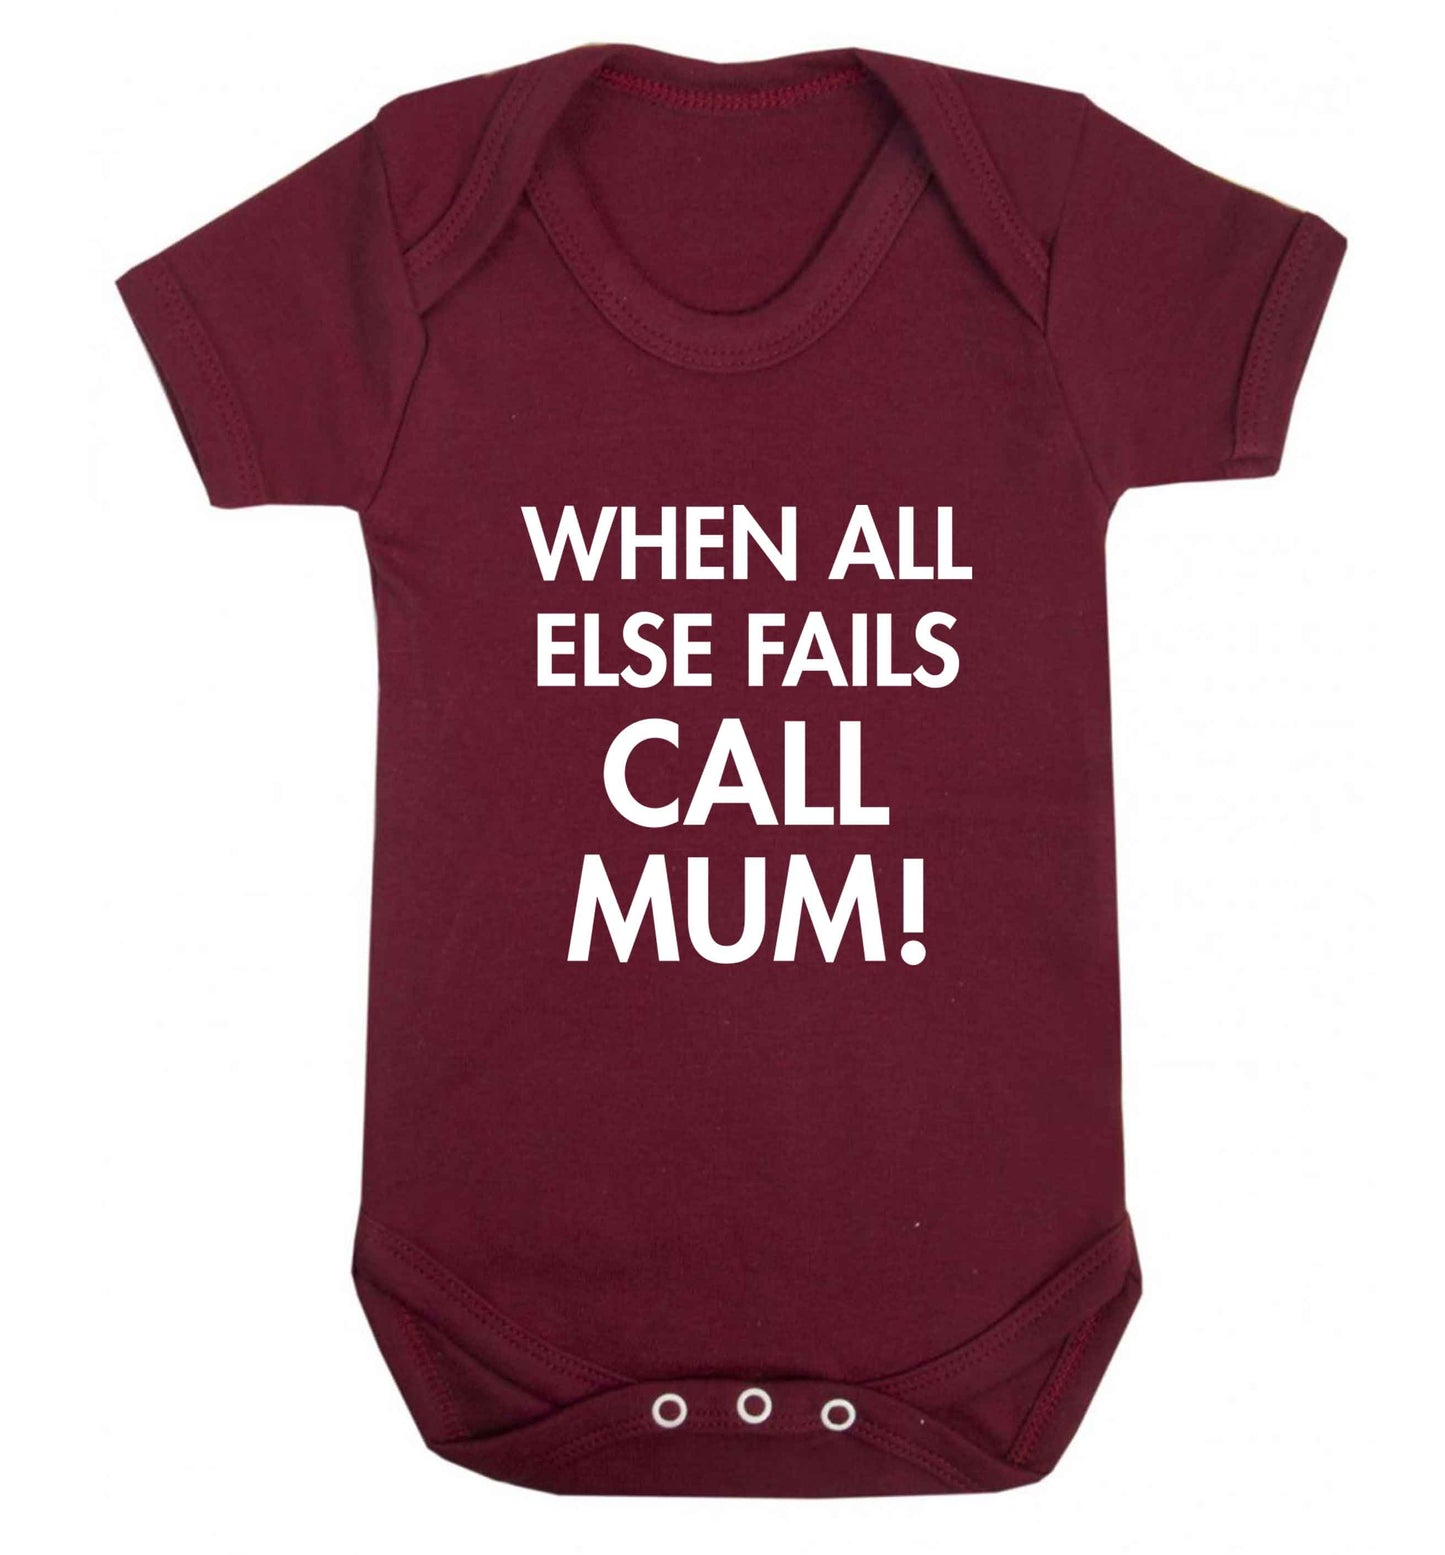 When all else fails call mum! baby vest maroon 18-24 months